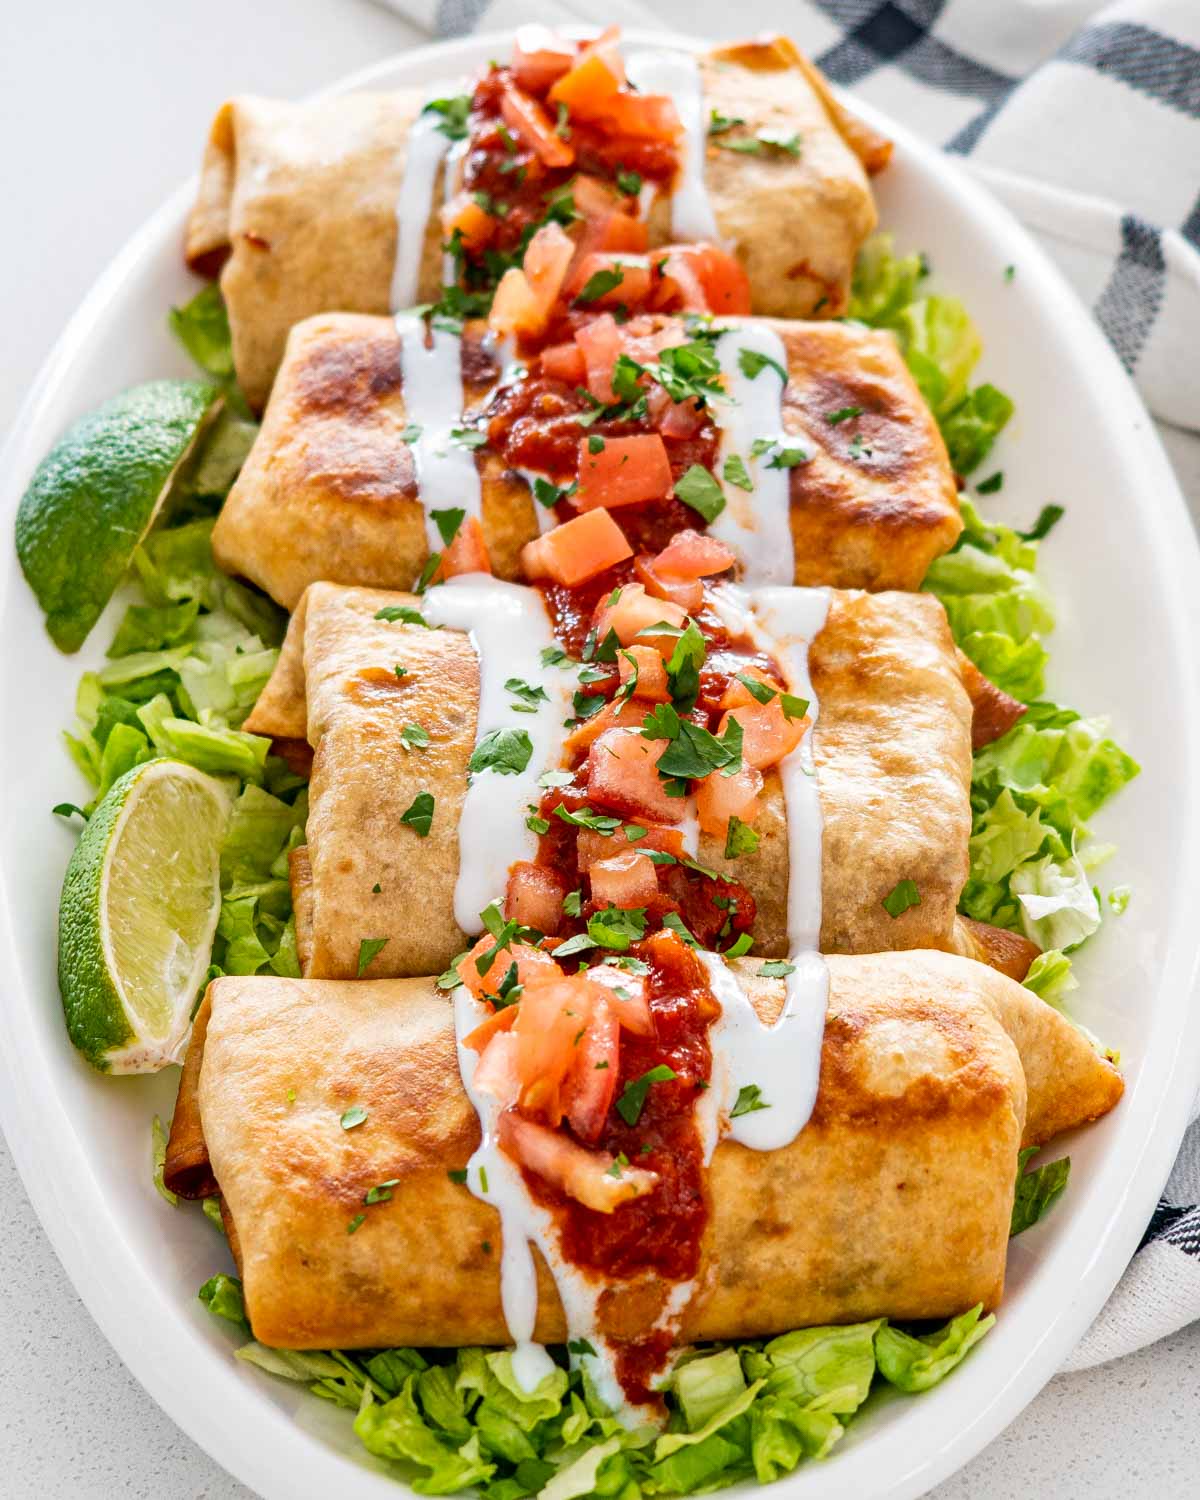 Mouthwatering Meal Made Easy: 30 Minute Chicken Chimichangas Recipe Guide